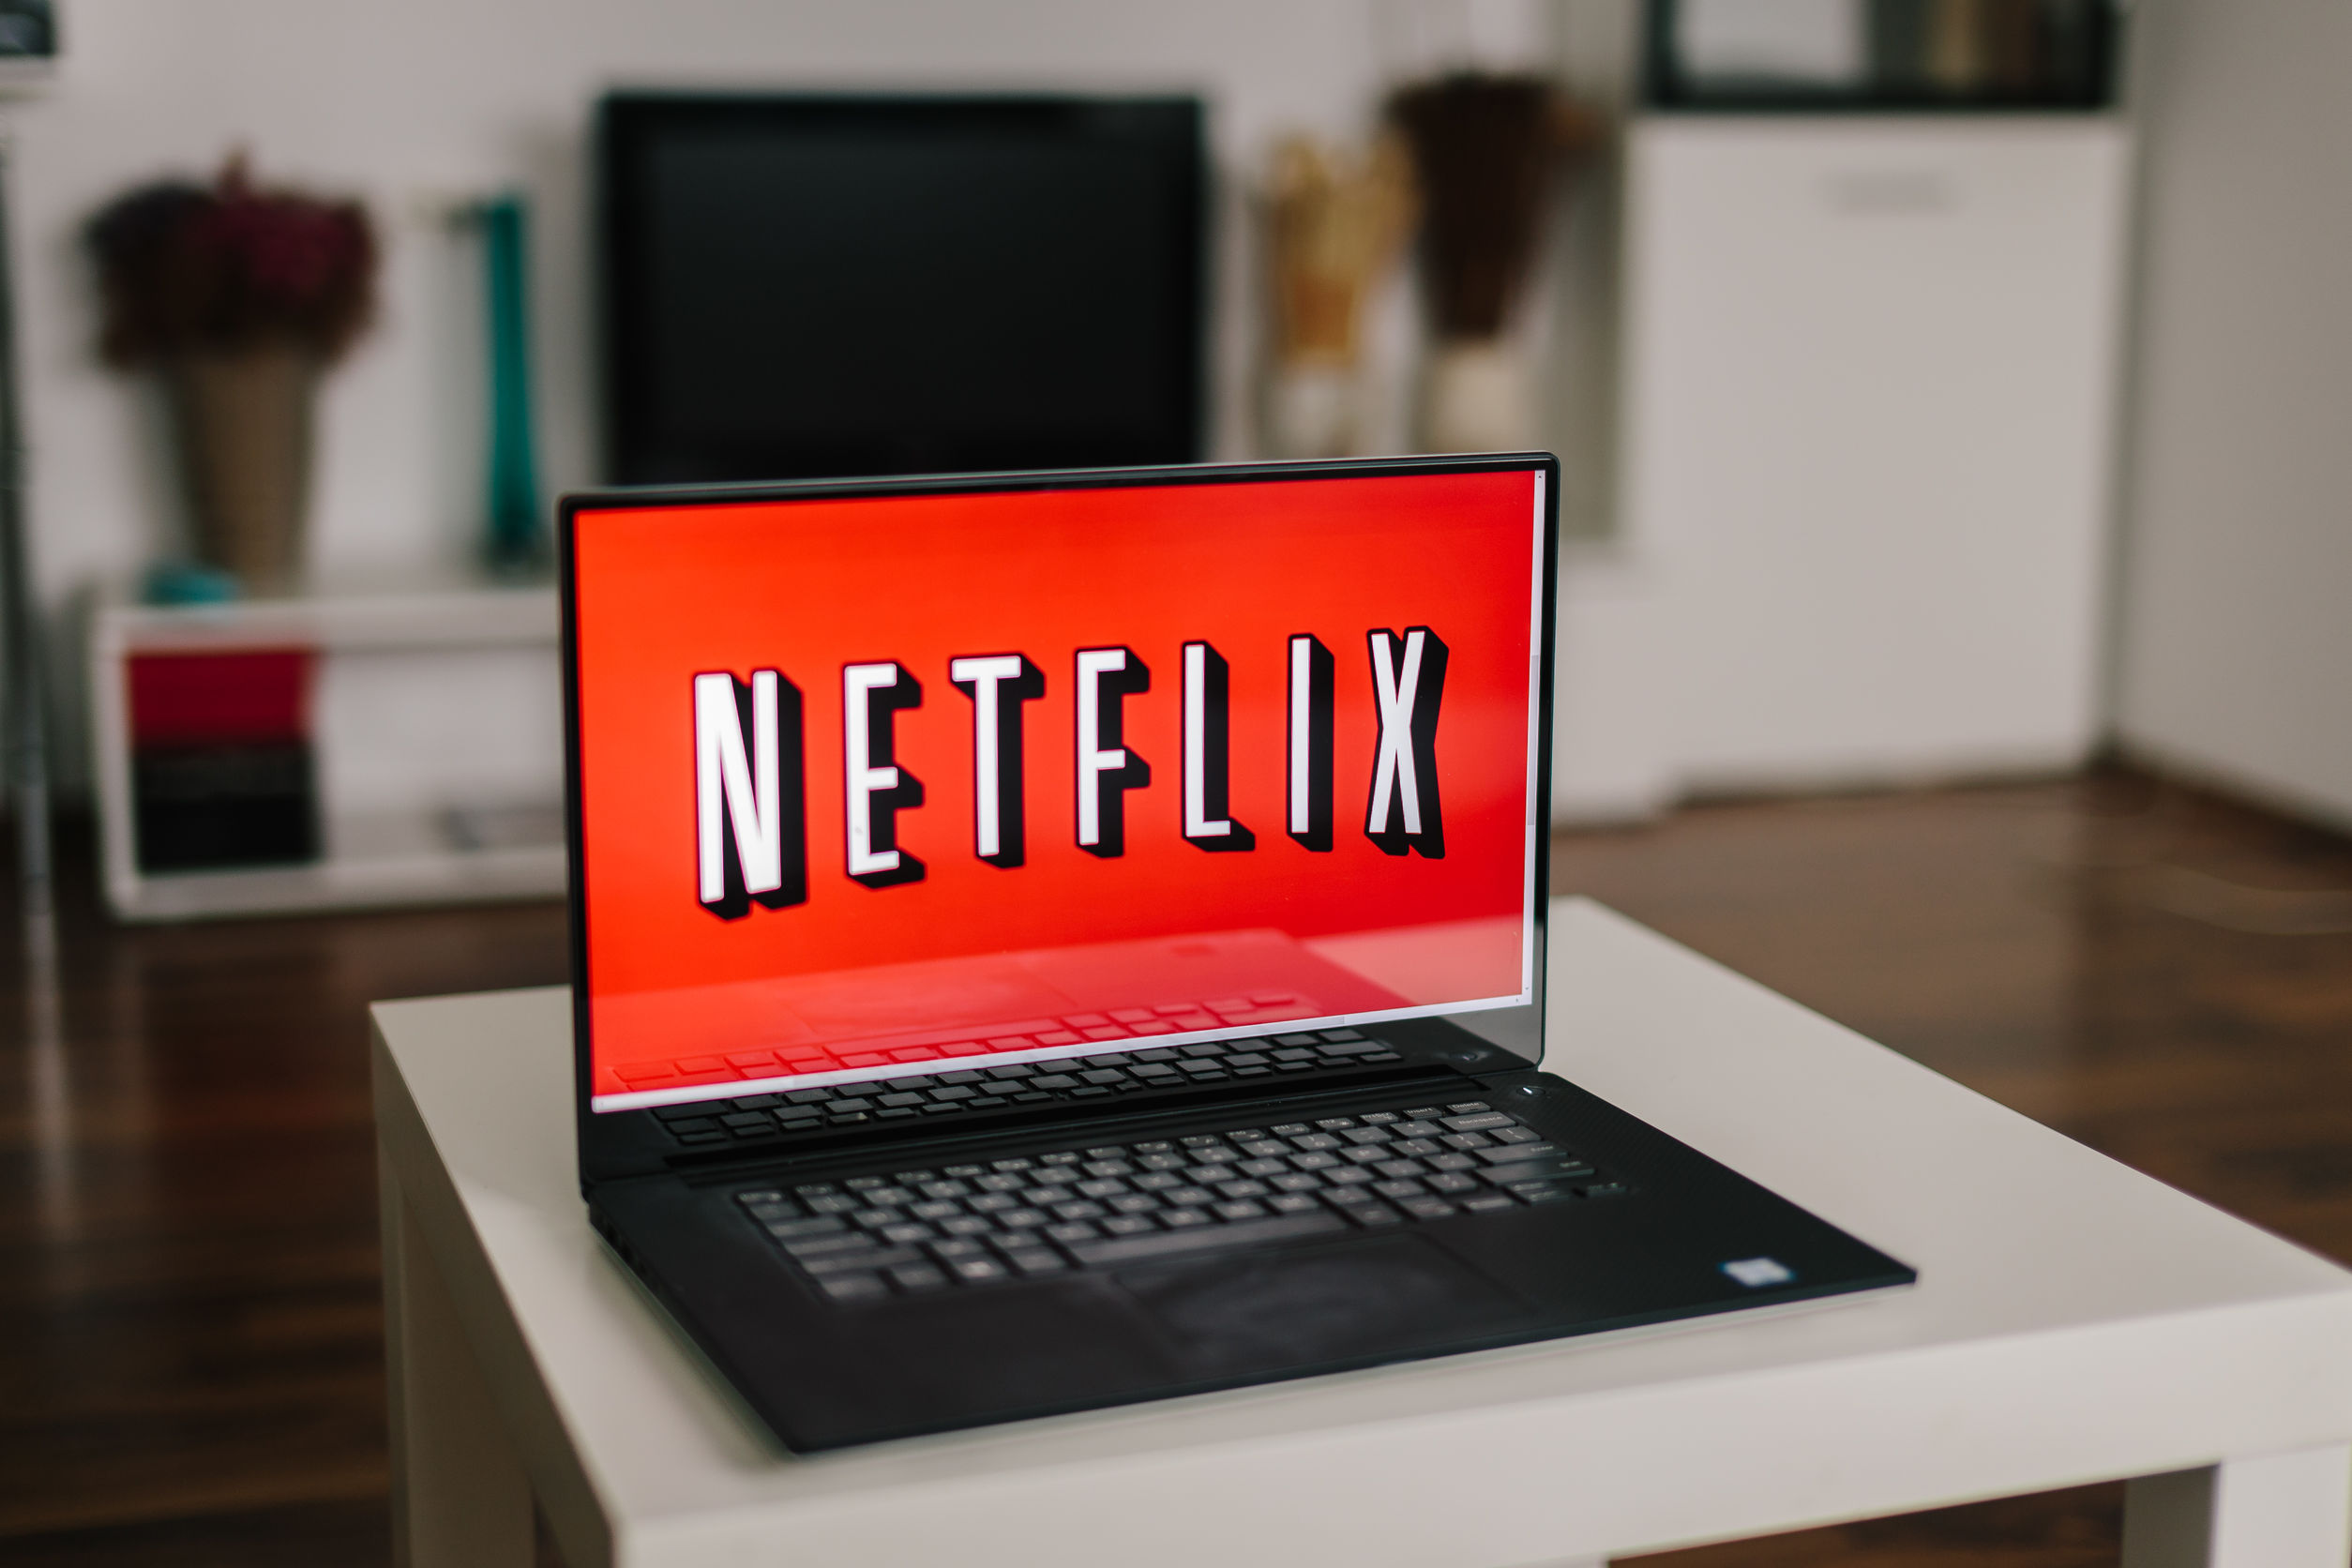 Read more about the article Work for Netflix from Home | Hot and Trending Jobs Ever<span class="rmp-archive-results-widget "><i class=" rmp-icon rmp-icon--ratings rmp-icon--star rmp-icon--full-highlight"></i><i class=" rmp-icon rmp-icon--ratings rmp-icon--star rmp-icon--full-highlight"></i><i class=" rmp-icon rmp-icon--ratings rmp-icon--star rmp-icon--full-highlight"></i><i class=" rmp-icon rmp-icon--ratings rmp-icon--star rmp-icon--full-highlight"></i><i class=" rmp-icon rmp-icon--ratings rmp-icon--star rmp-icon--full-highlight"></i> <span>5 (39)</span></span>